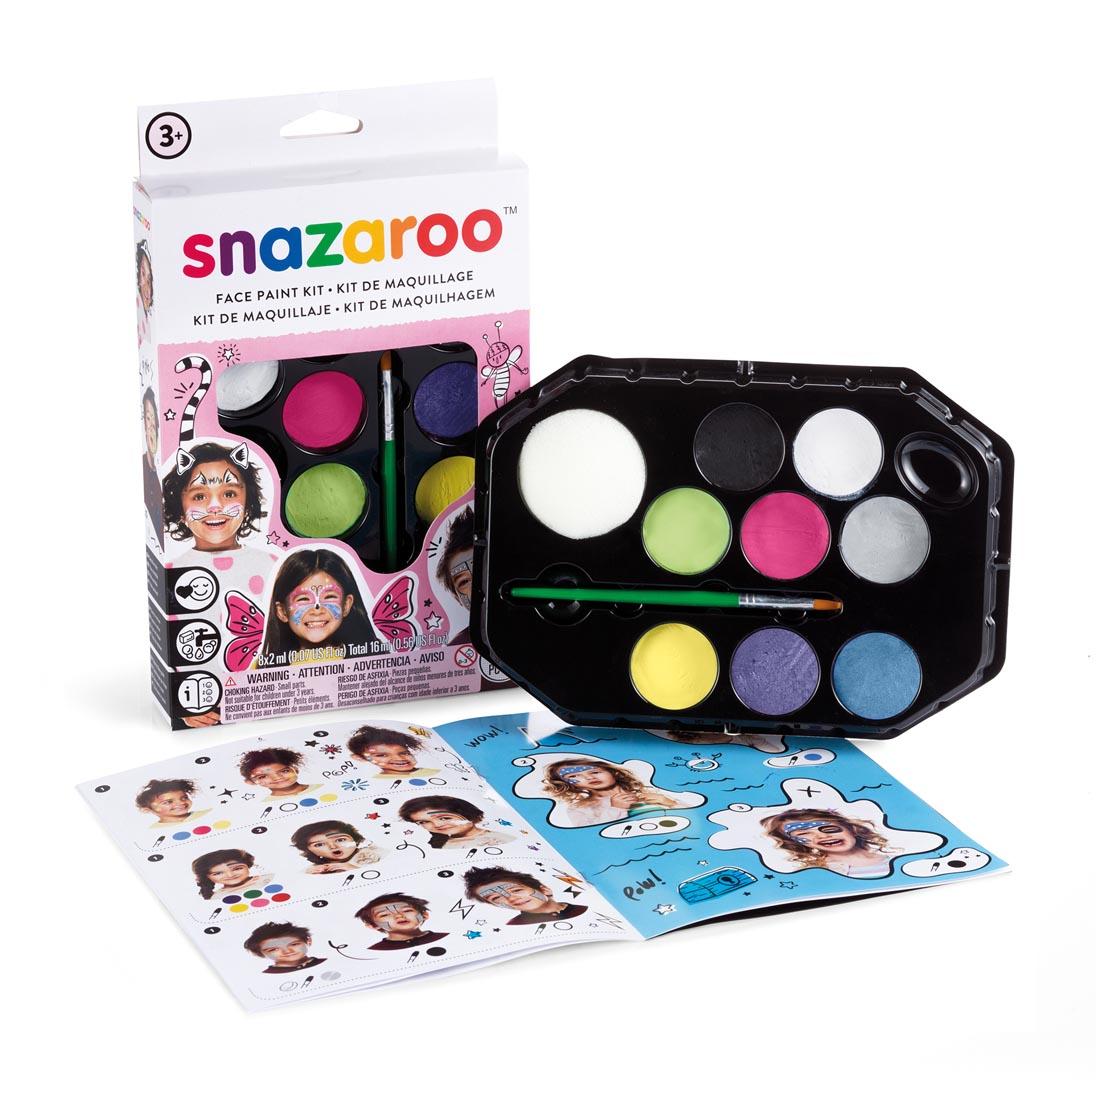 Pink box of Snazaroo Face Paint Kit, with paint palette and idea guide shown outside of box